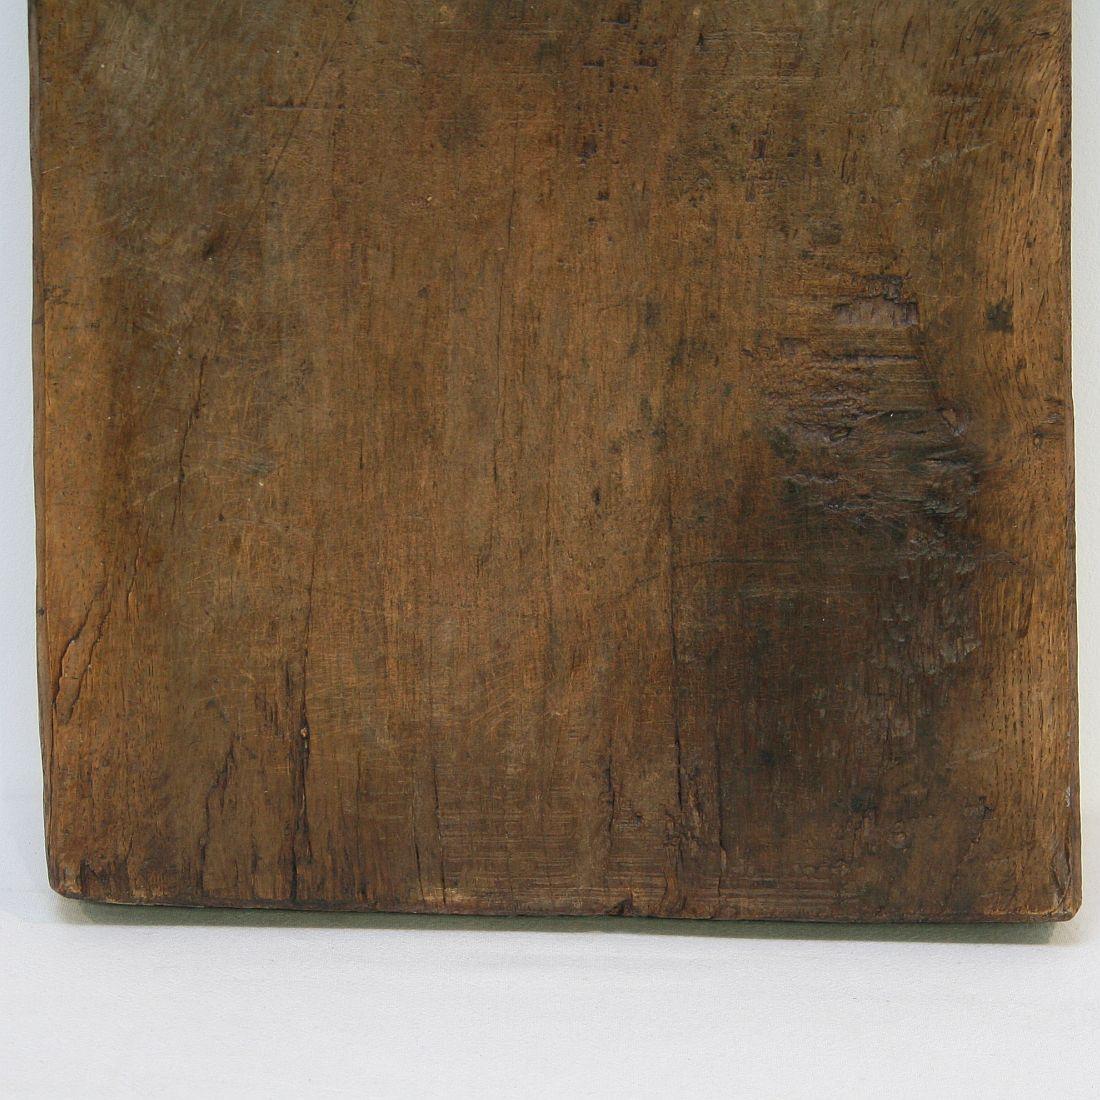 French, 19th Century, Wooden Chopping or Cutting Board 2